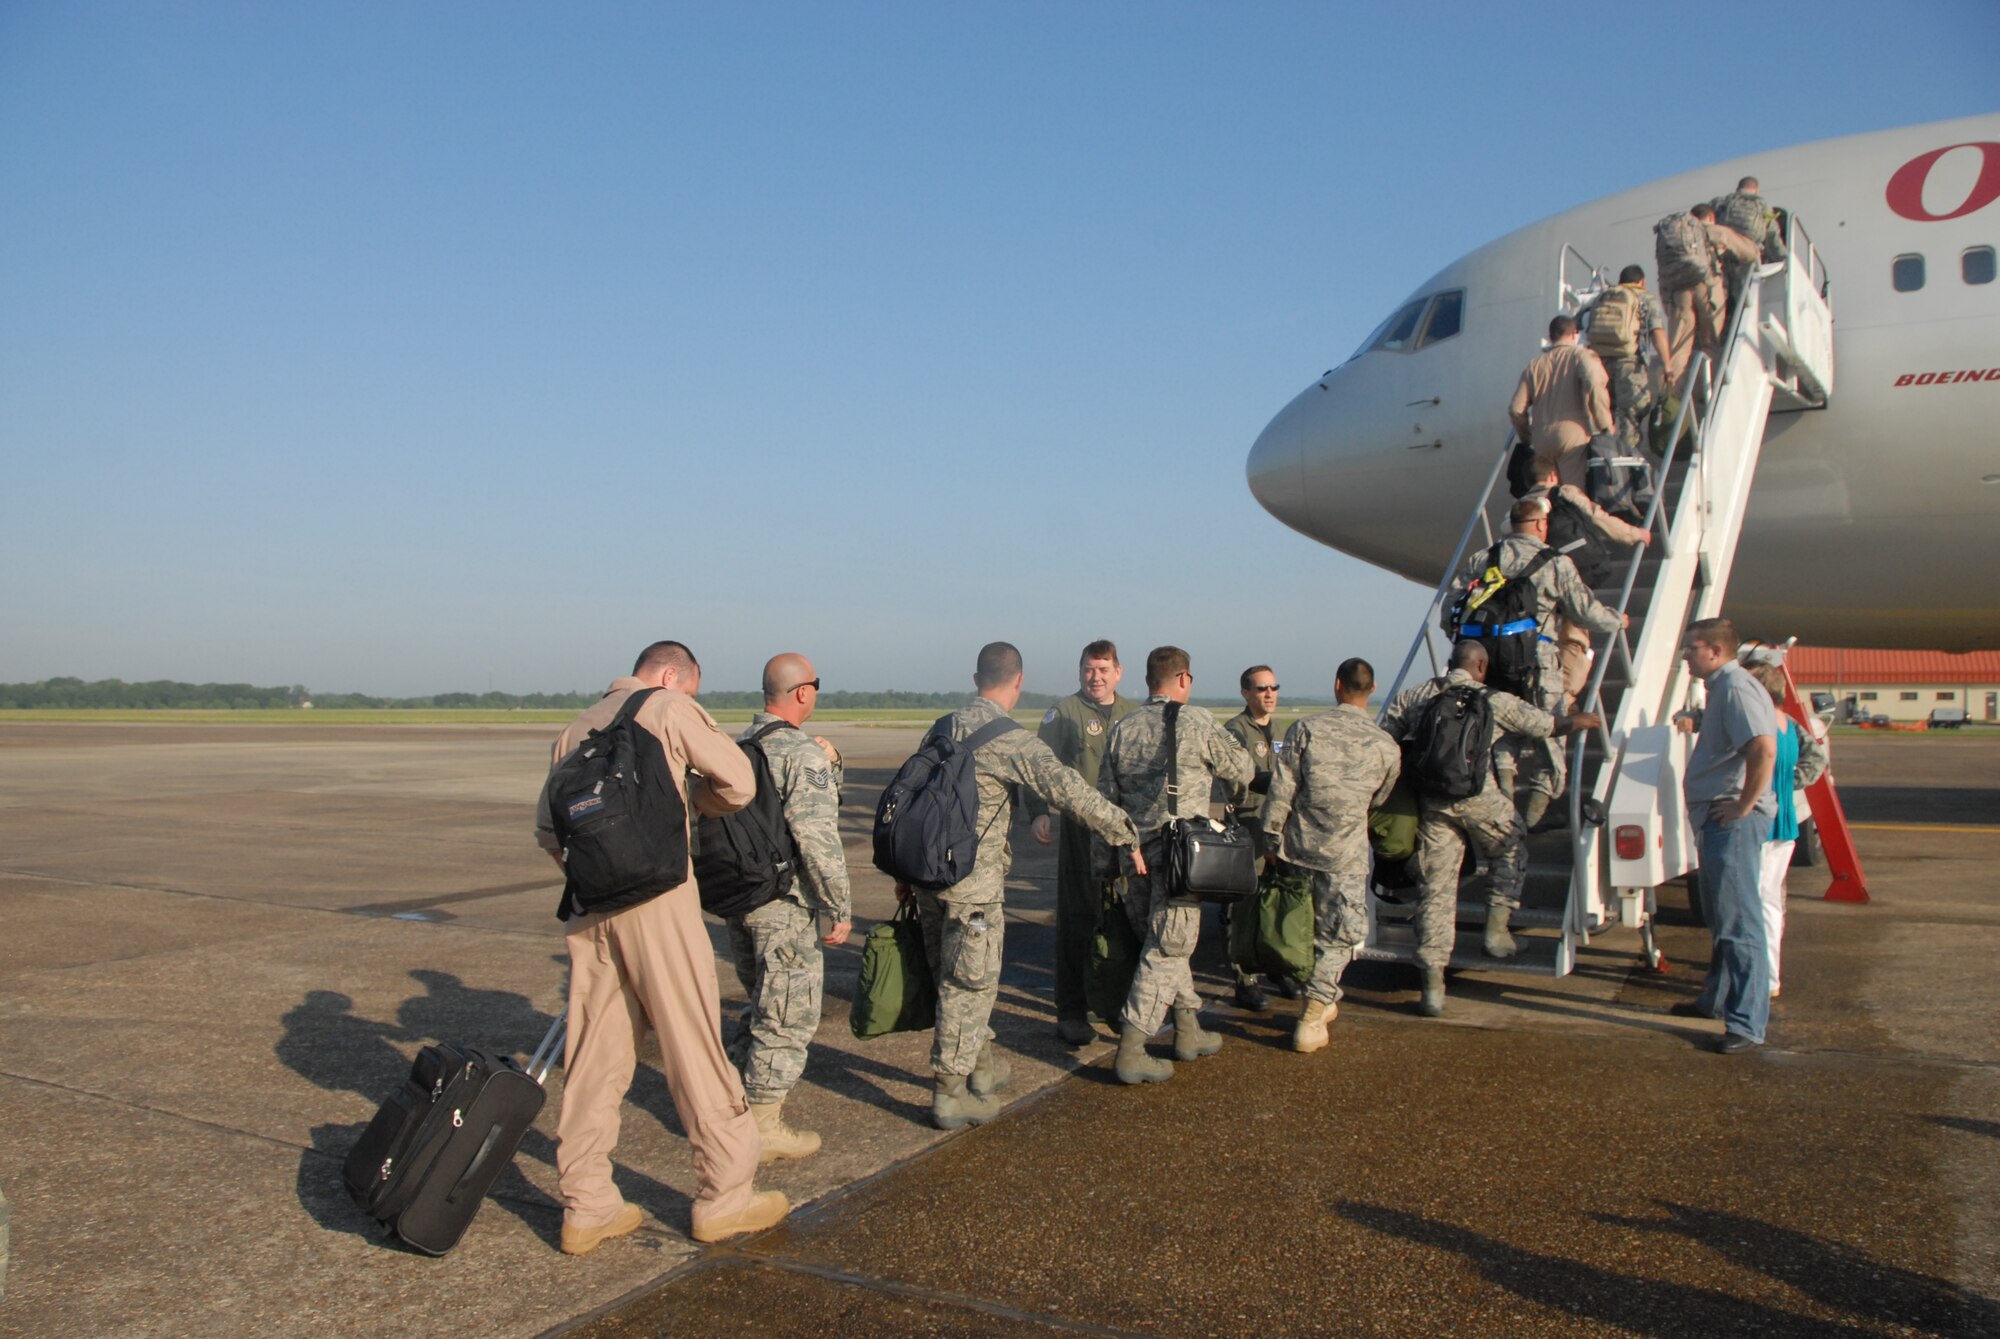 The Air Force will deploy Agile Combat Support Airmen under its redesigned air expeditionary force construct October 1. (Photo by Gene H. Hughes)